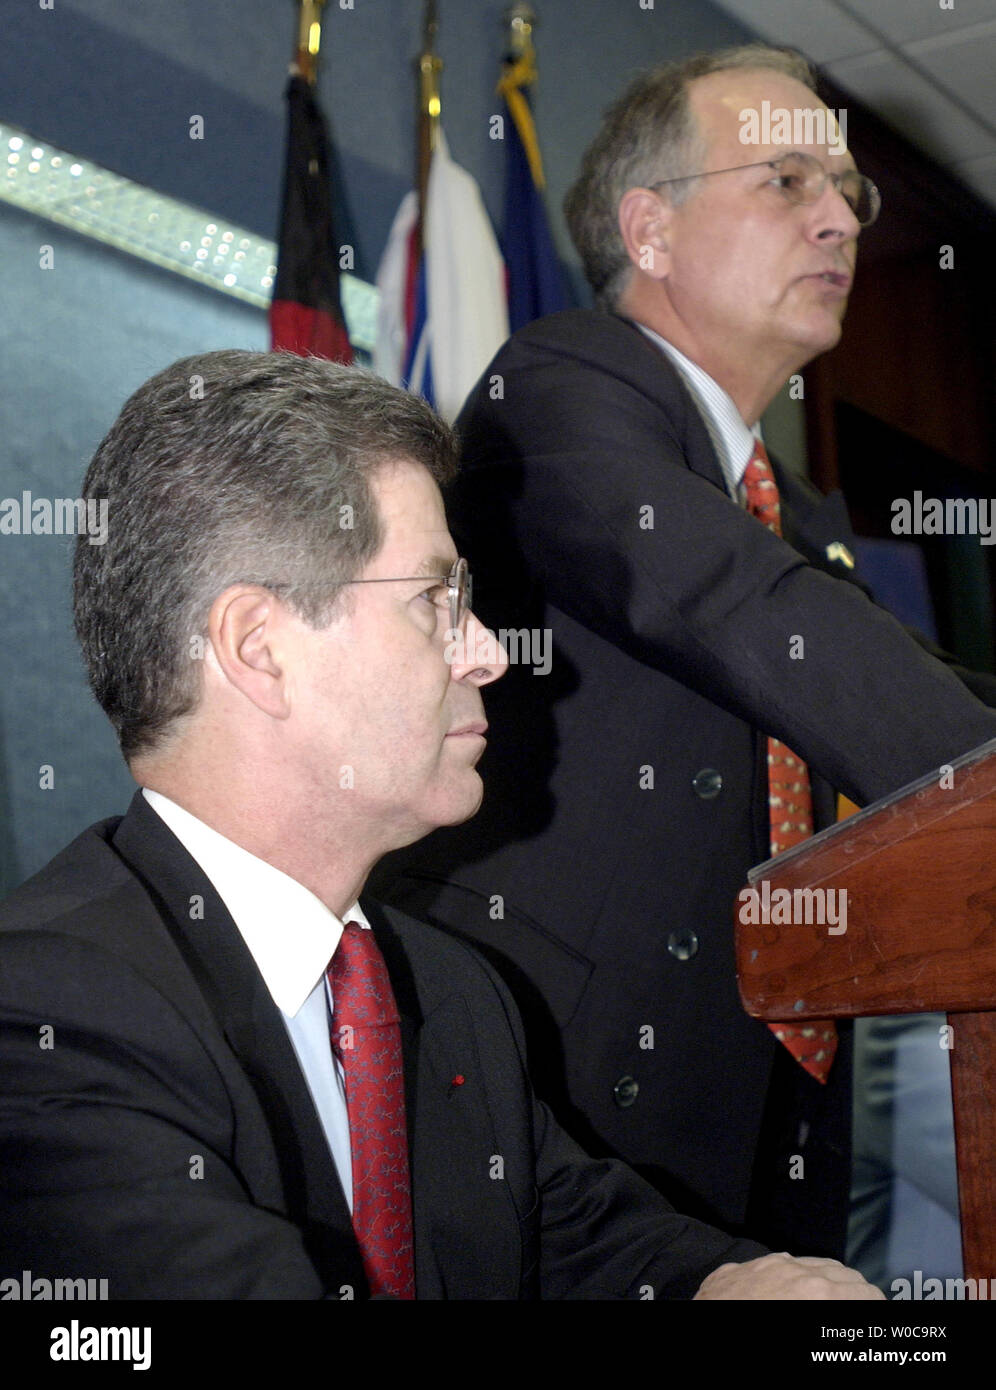 French Ambassador to the United States Jean David Levitte left, listens in as German Ambassador to the United States Wolfgang Ischinger anwsers a reporter's question during an anouncement of a new program between the United States, France and Germany at the National Press Club on December 12, 2003 in Washington.  Both gentlemen tried to avoid questions regarding the decision by the United States to keep companies from their countries from gaining  contracts in Iraq. (UPI Photo/Michael Kleinfeld) Stock Photo